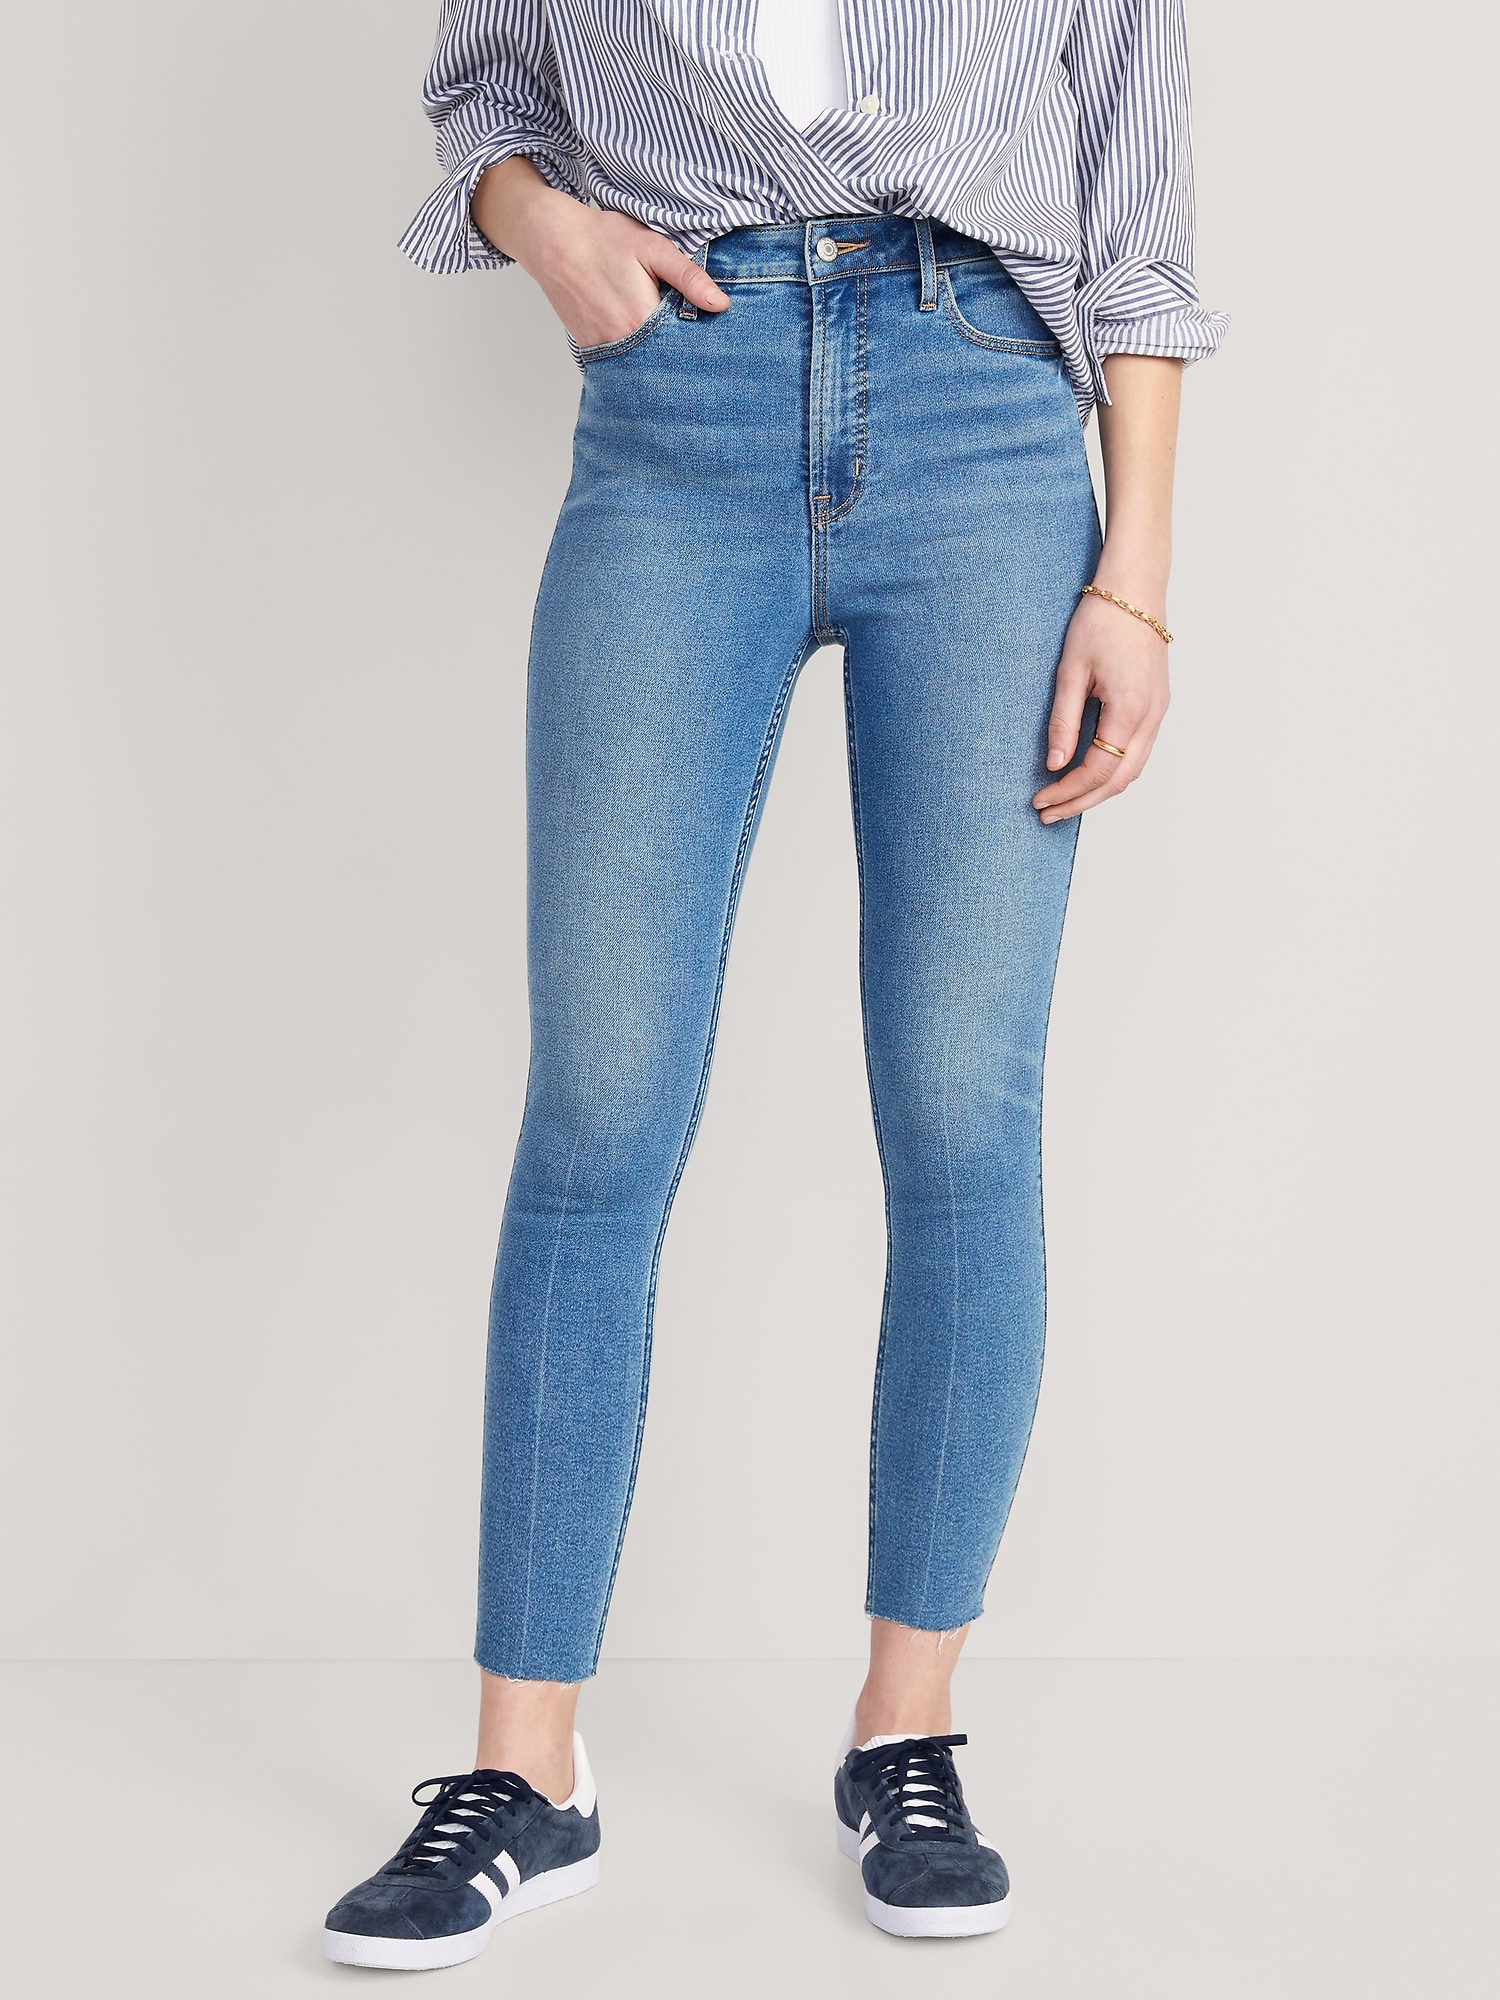 High-Waisted Rockstar Super-Skinny Jeans For Women - Old Navy